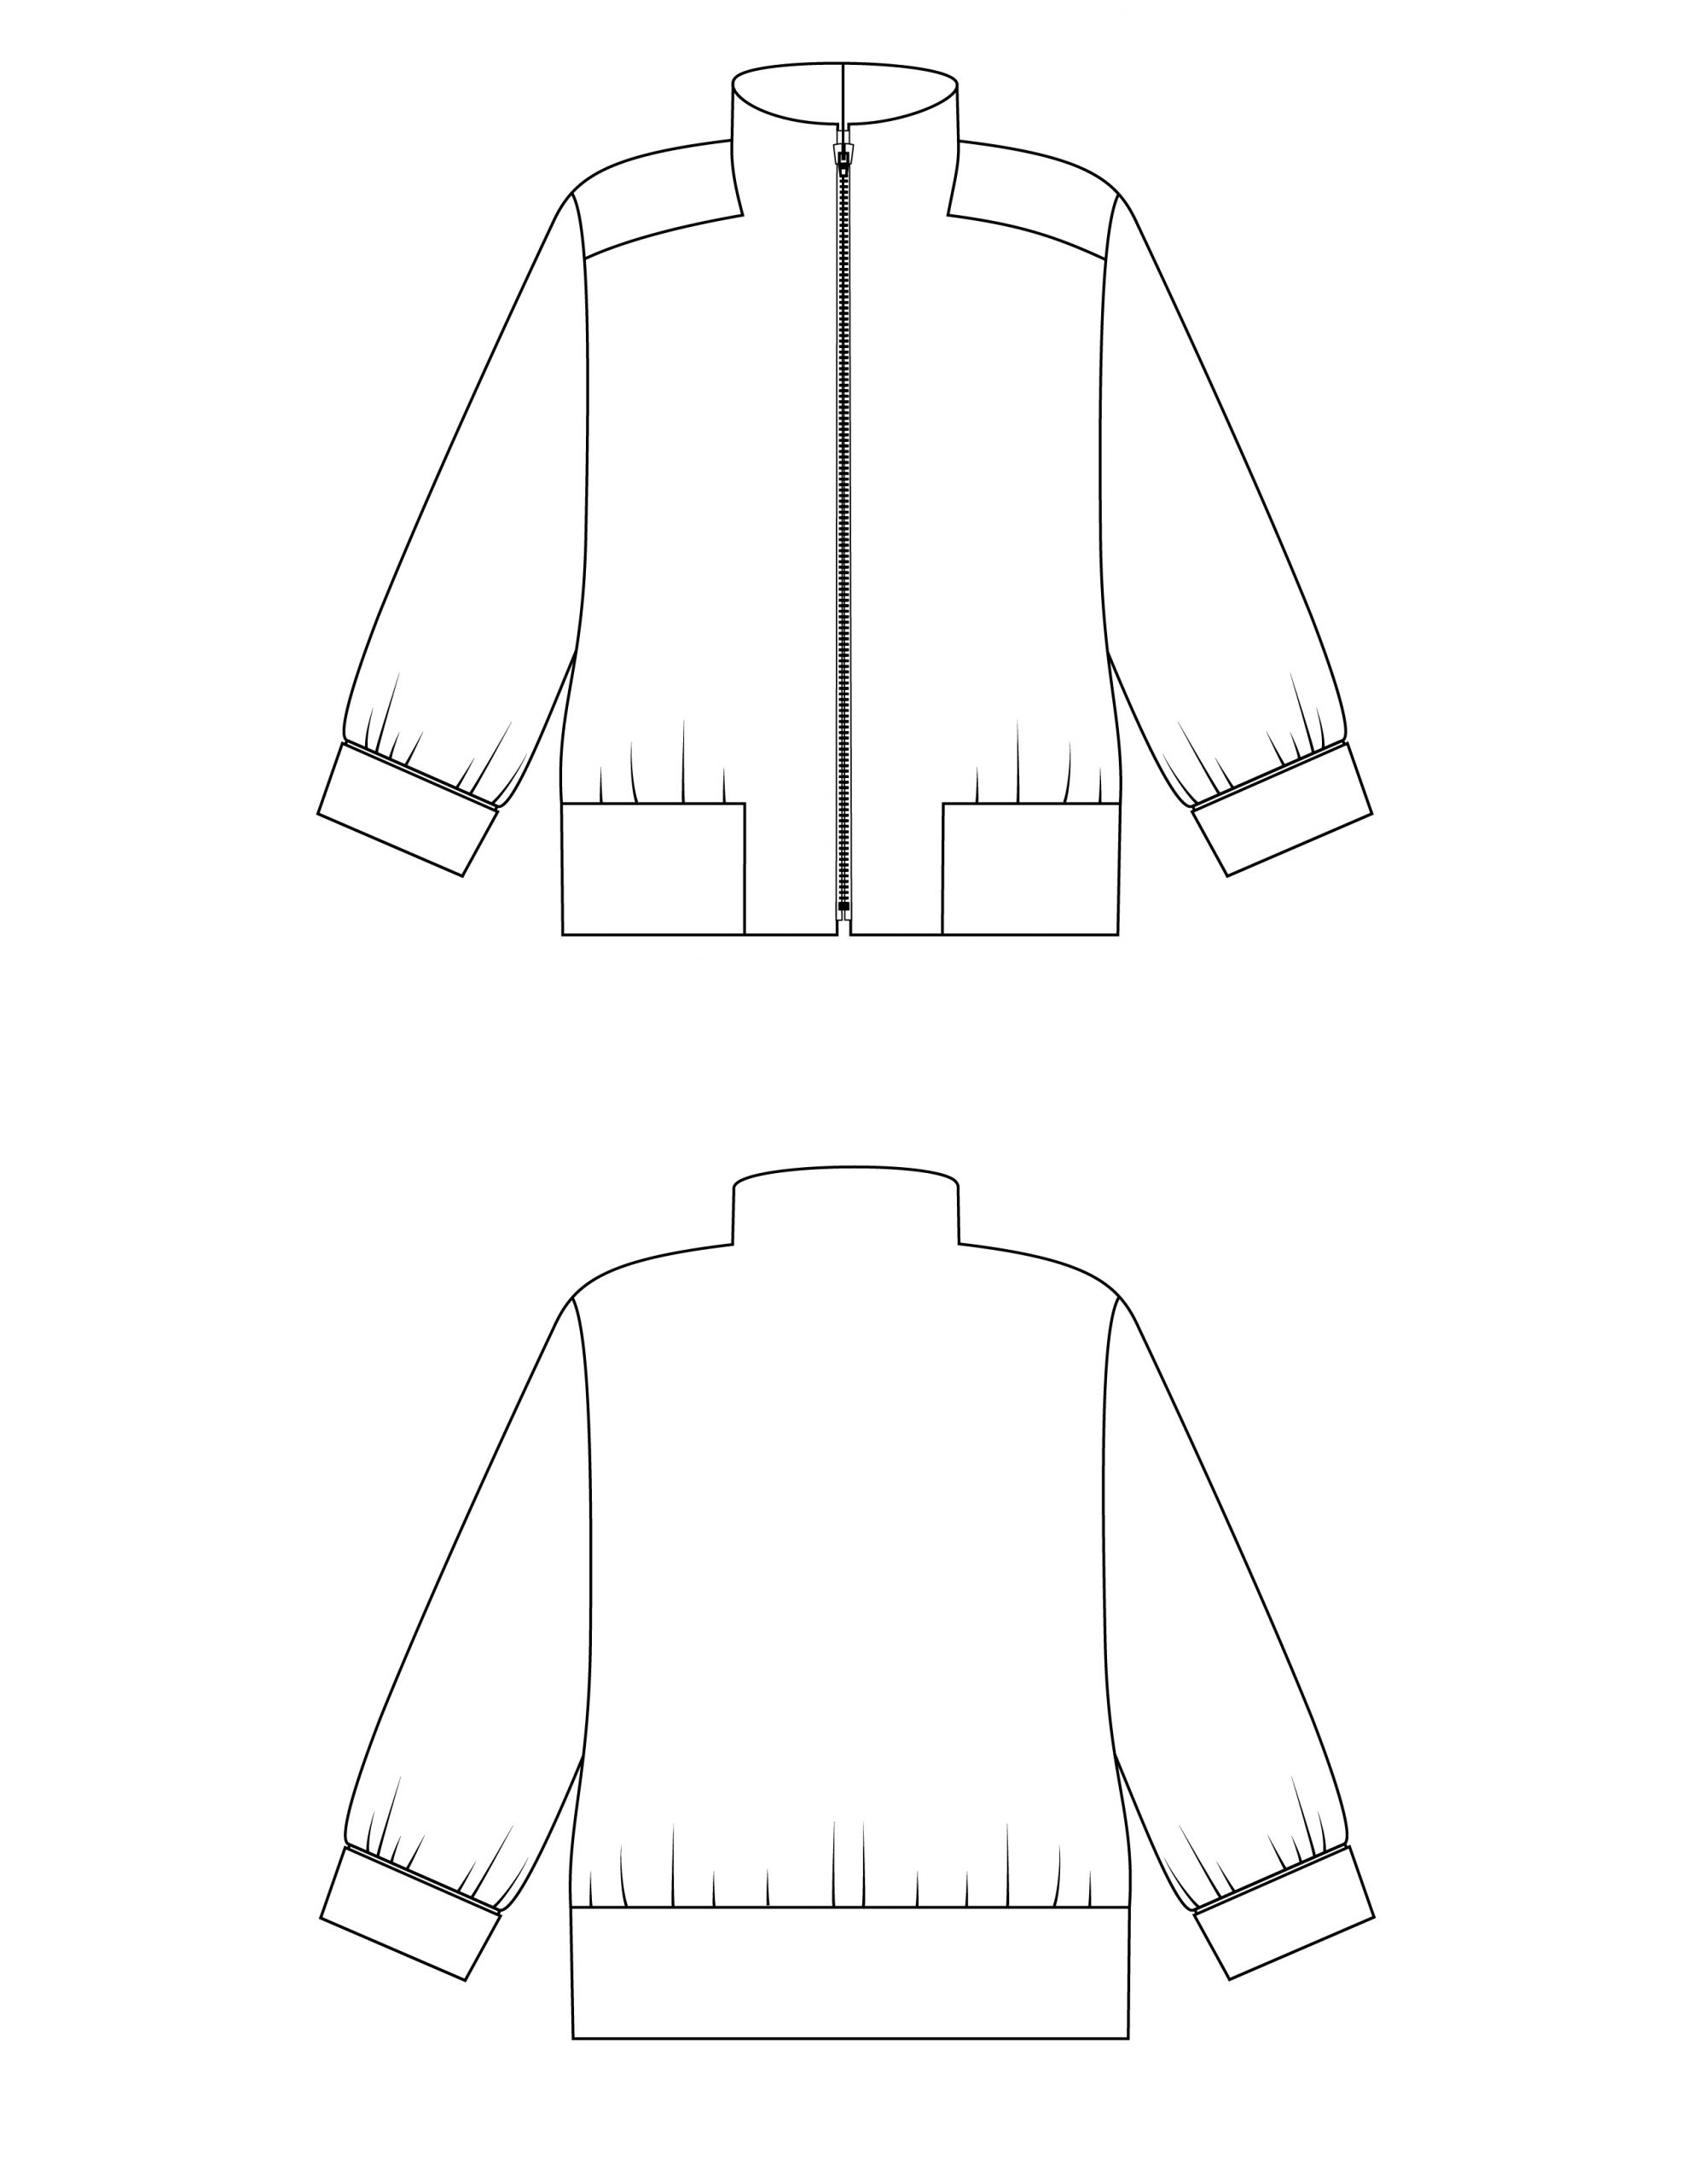 Ladies Bomber Jacket Front and Back Flat Sketch Vector Template by Abdullah  Al Mamun on Dribbble